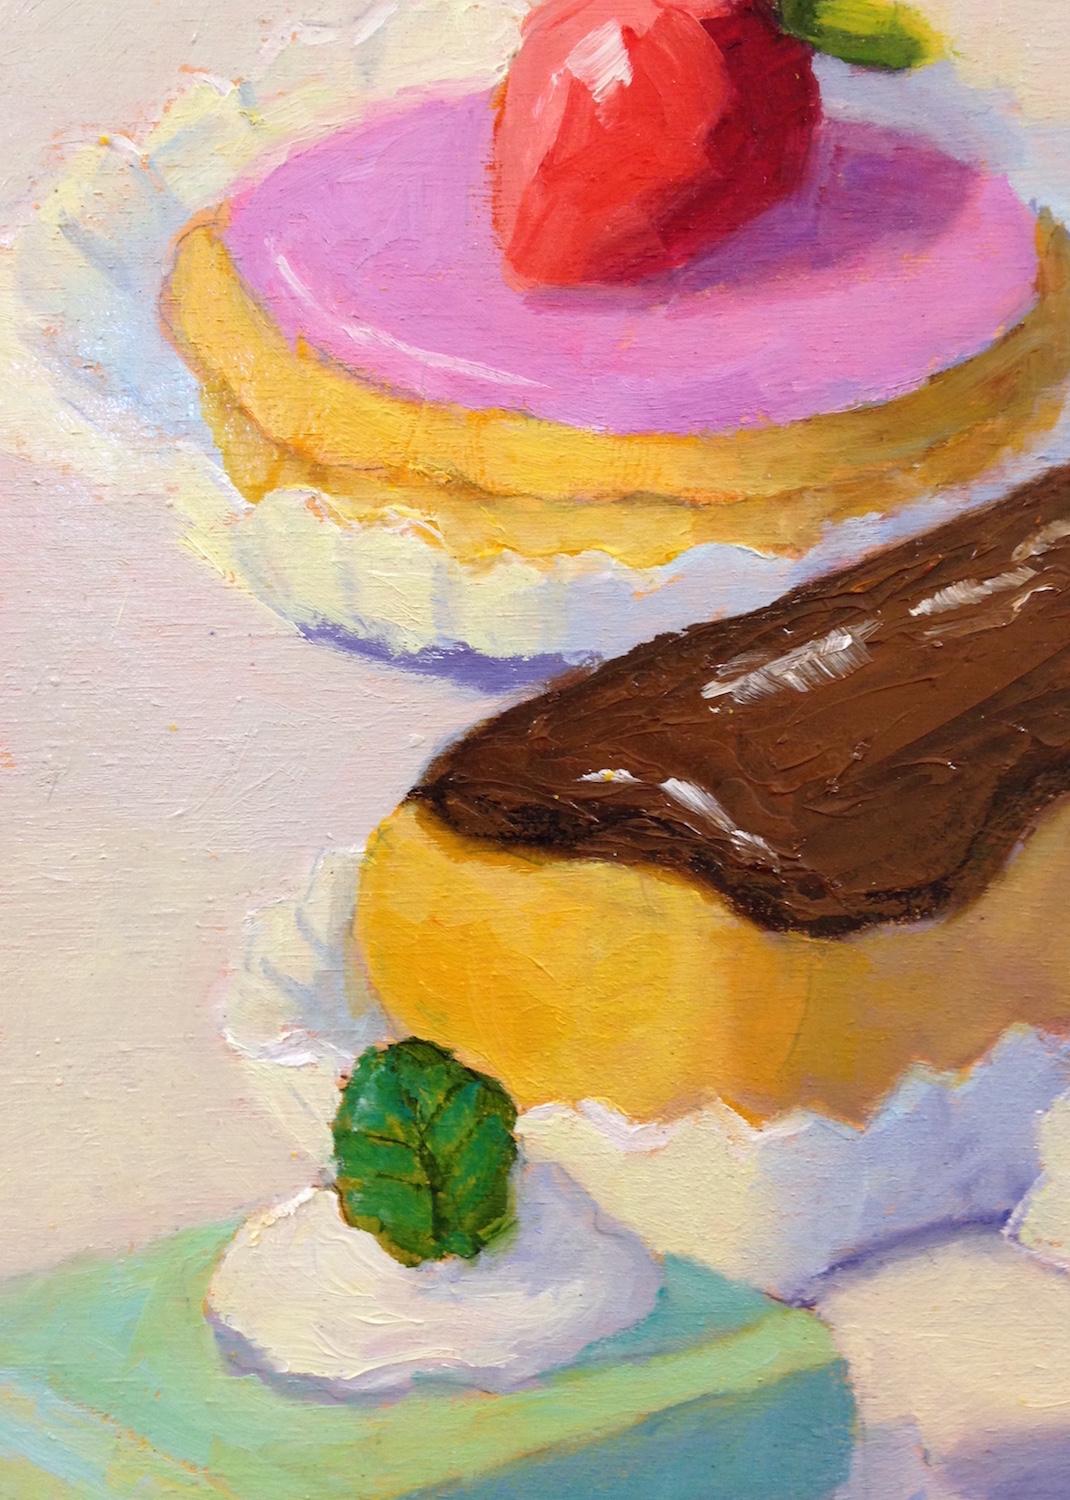 <p>Artist Comments<br />Colorful tarts, cakes and eclairs arranged as an homage to Wayne Thiebaud. Pat Doherty's delectable oil paintings draw on her experience as a former commercial art director and designer. She seeks out her subjects at farmers